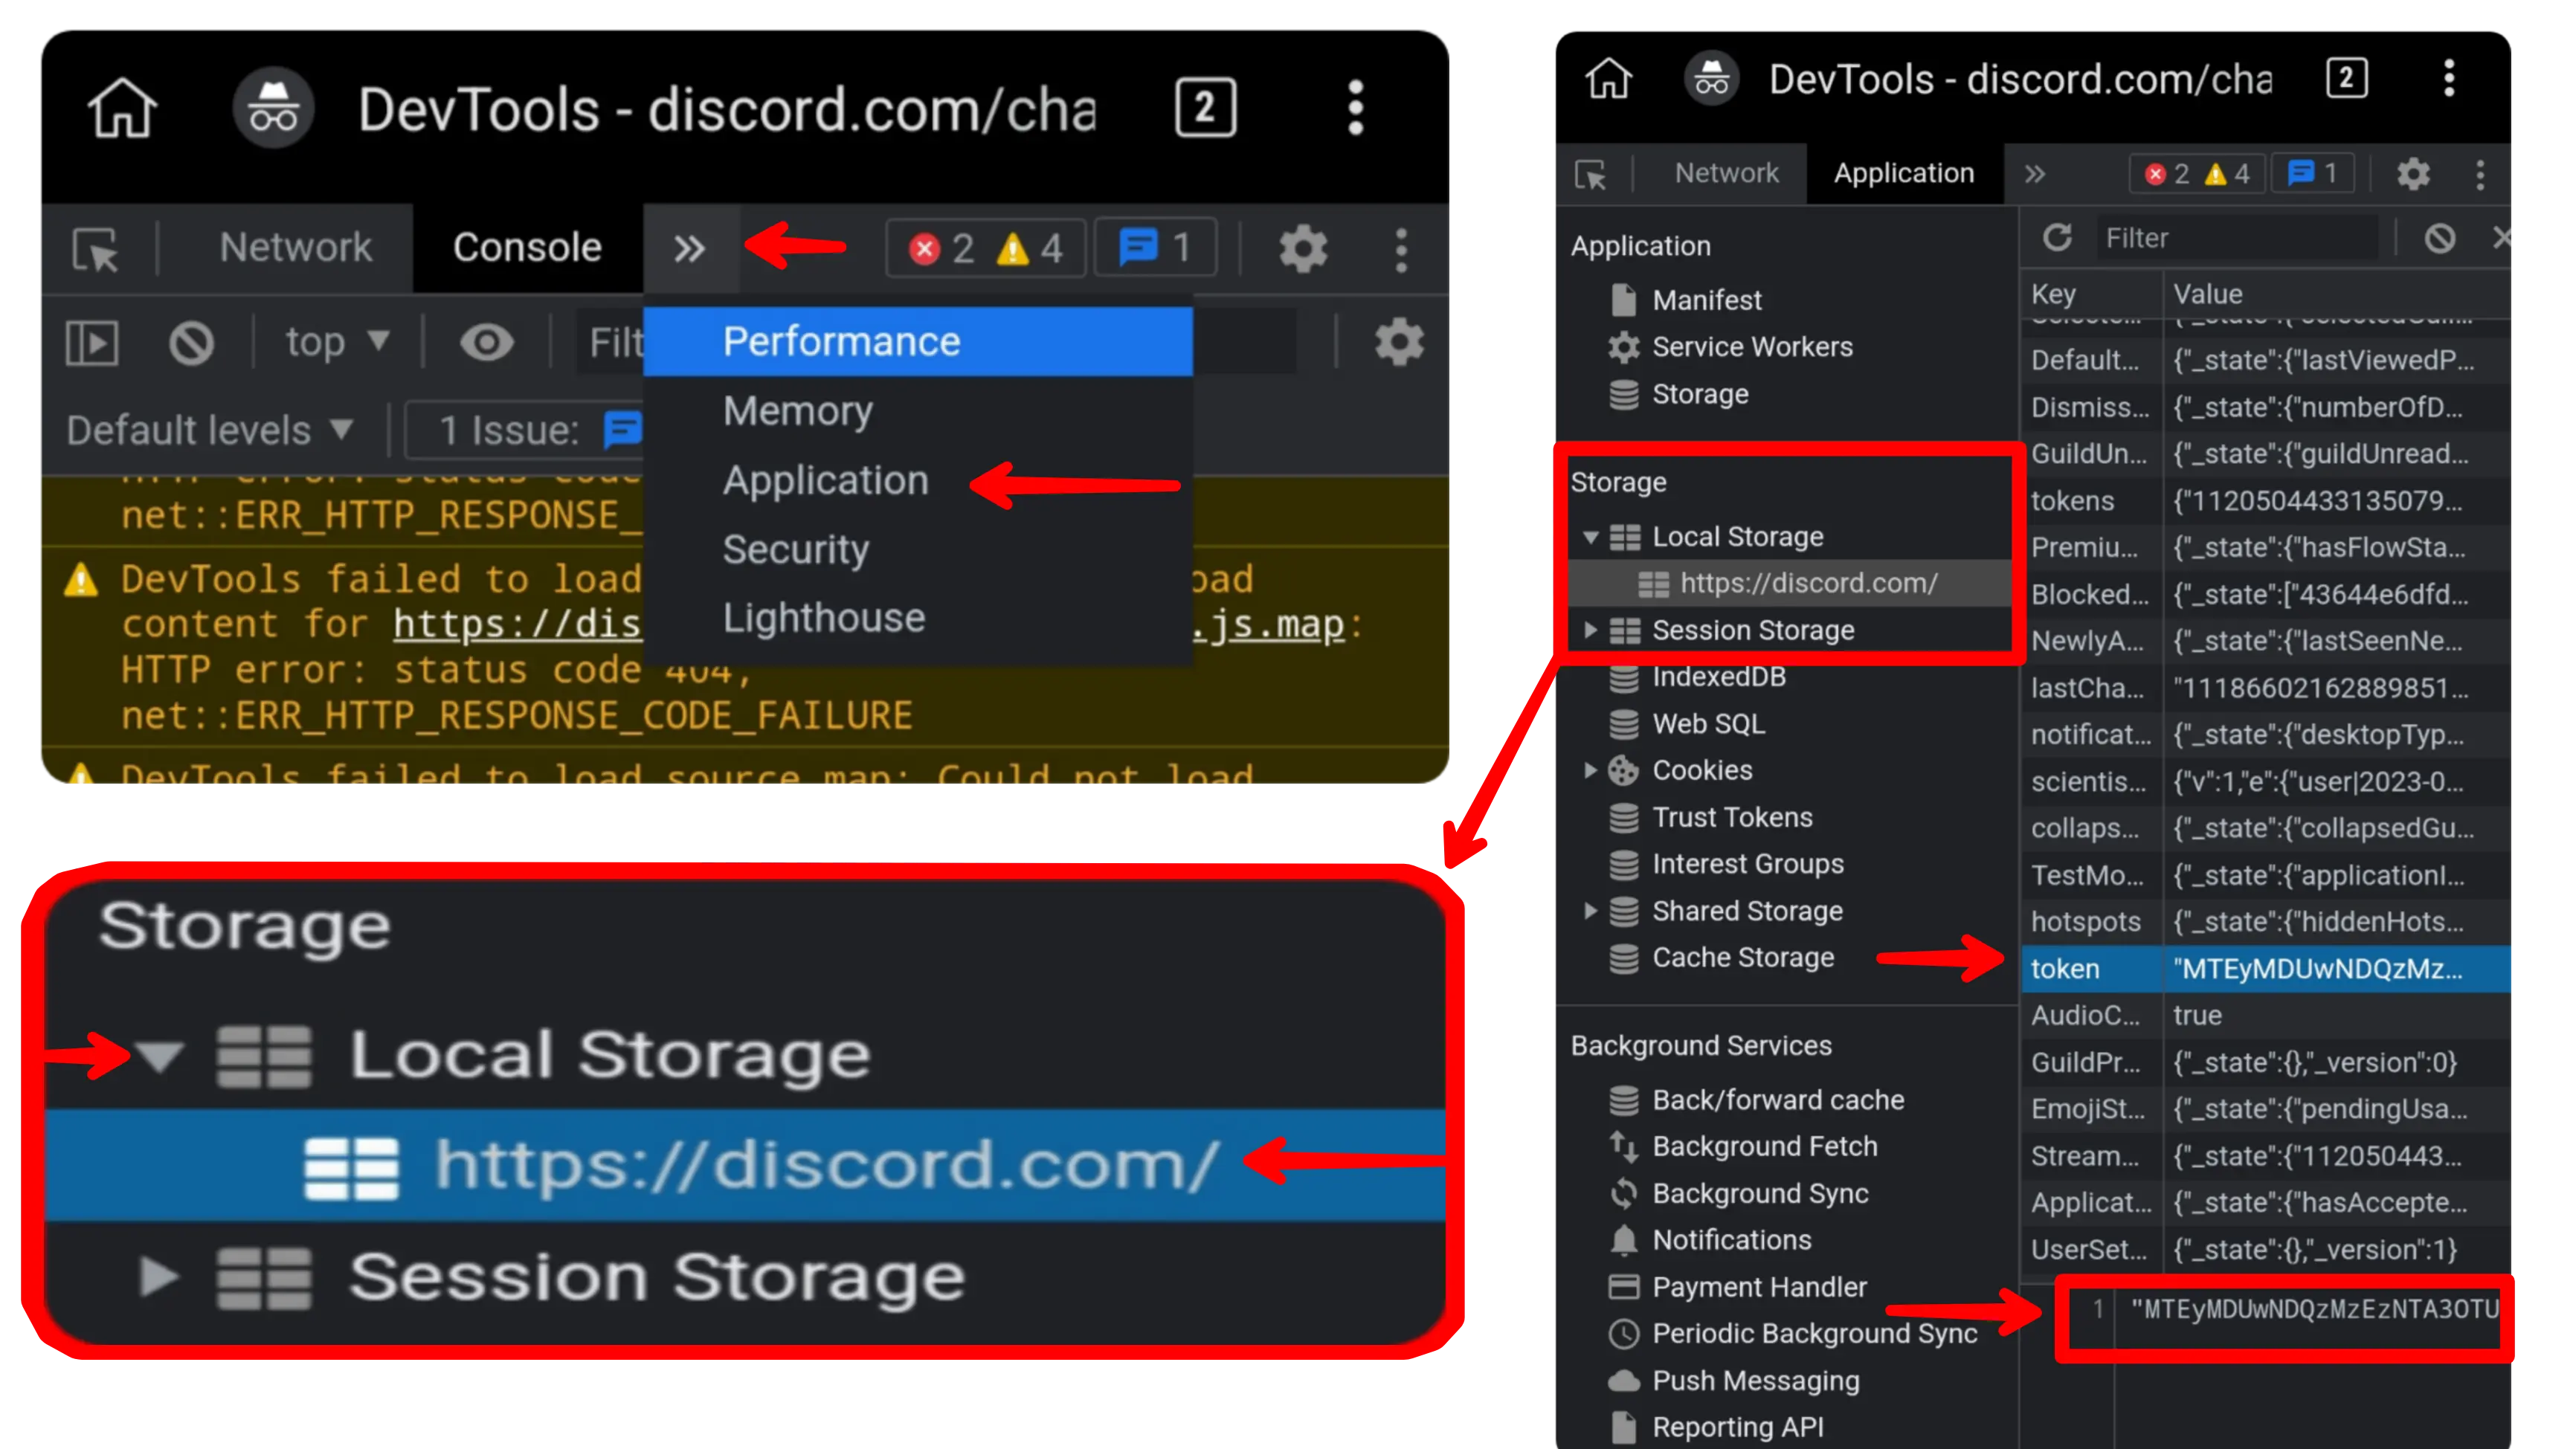 Lost connection to host or steam фото 51